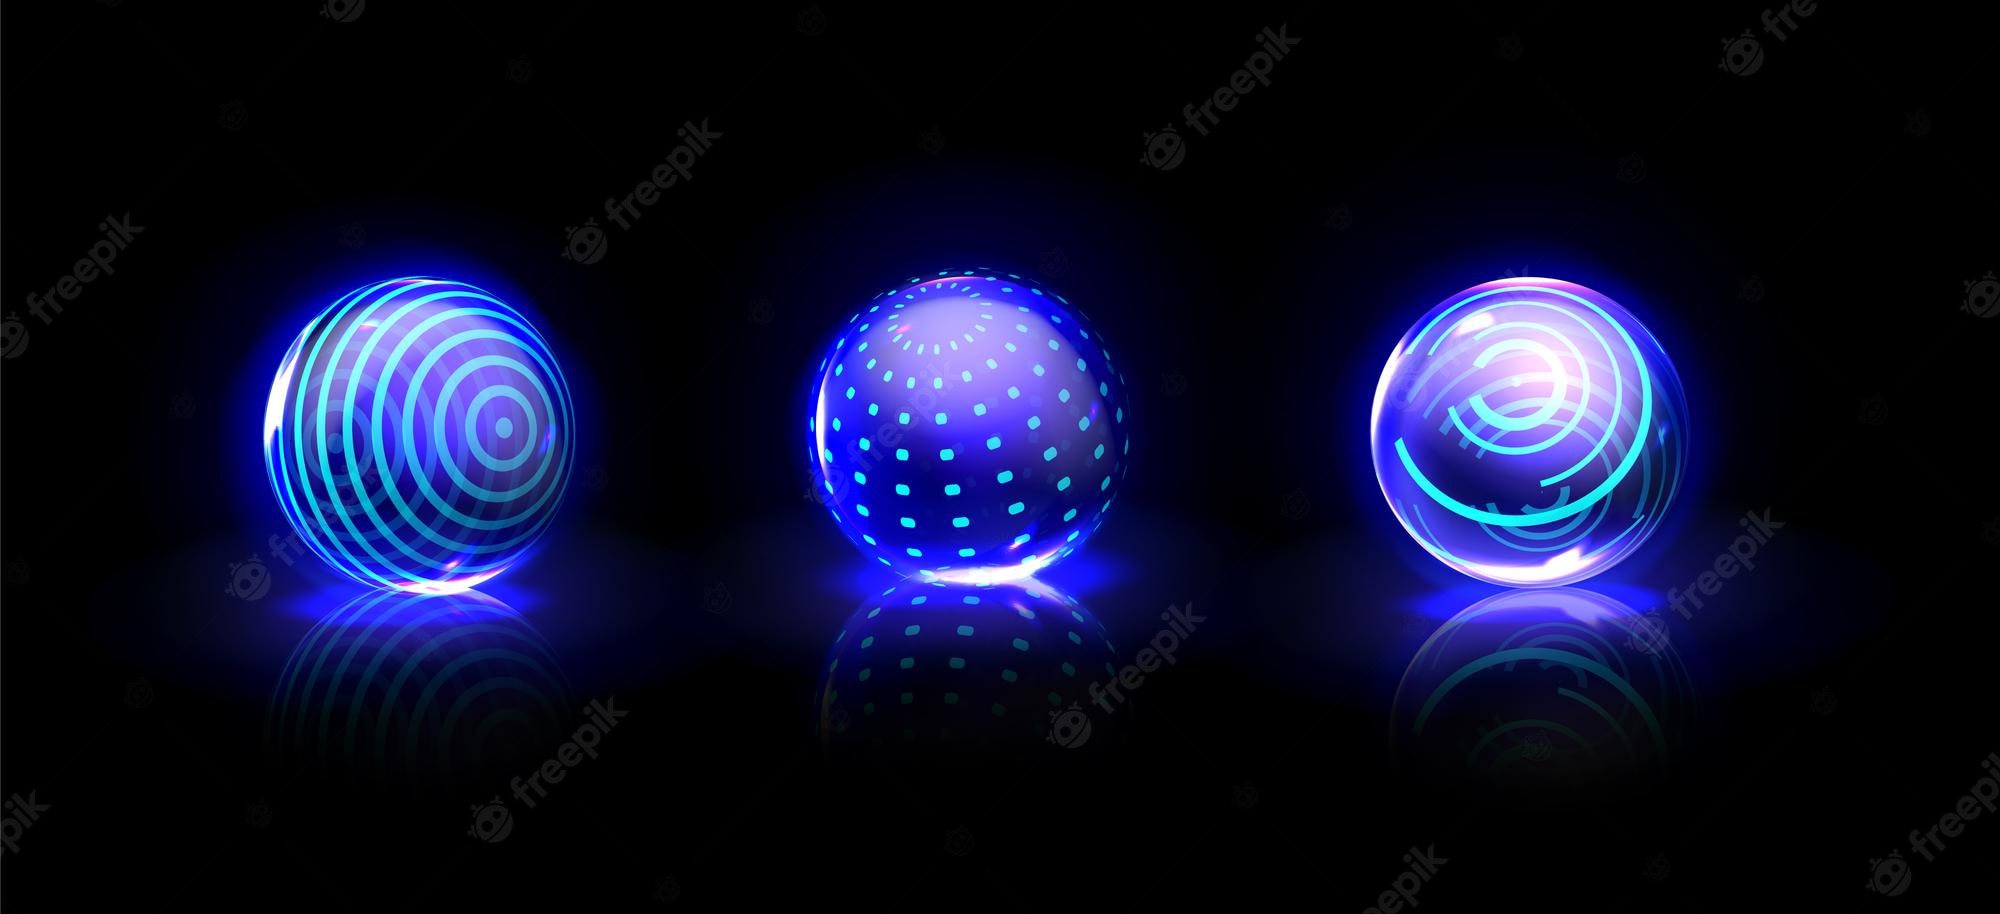 Acrylic Half Colorful Abstract Sphere Wallpapers